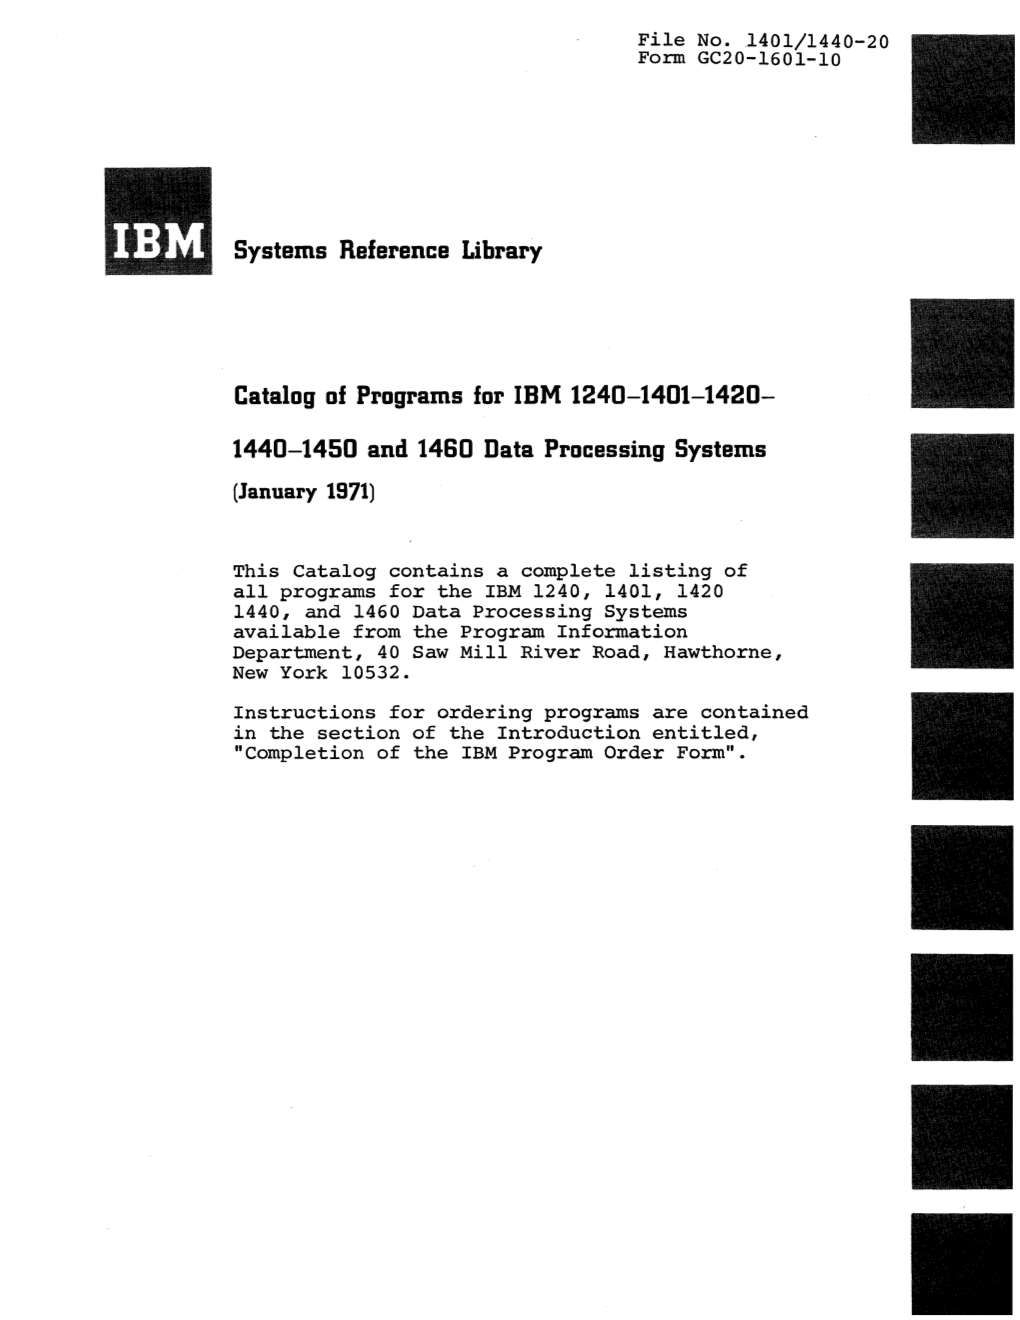 Systems Reference Library Catalog of Programs for IBM 1240-1401-1420